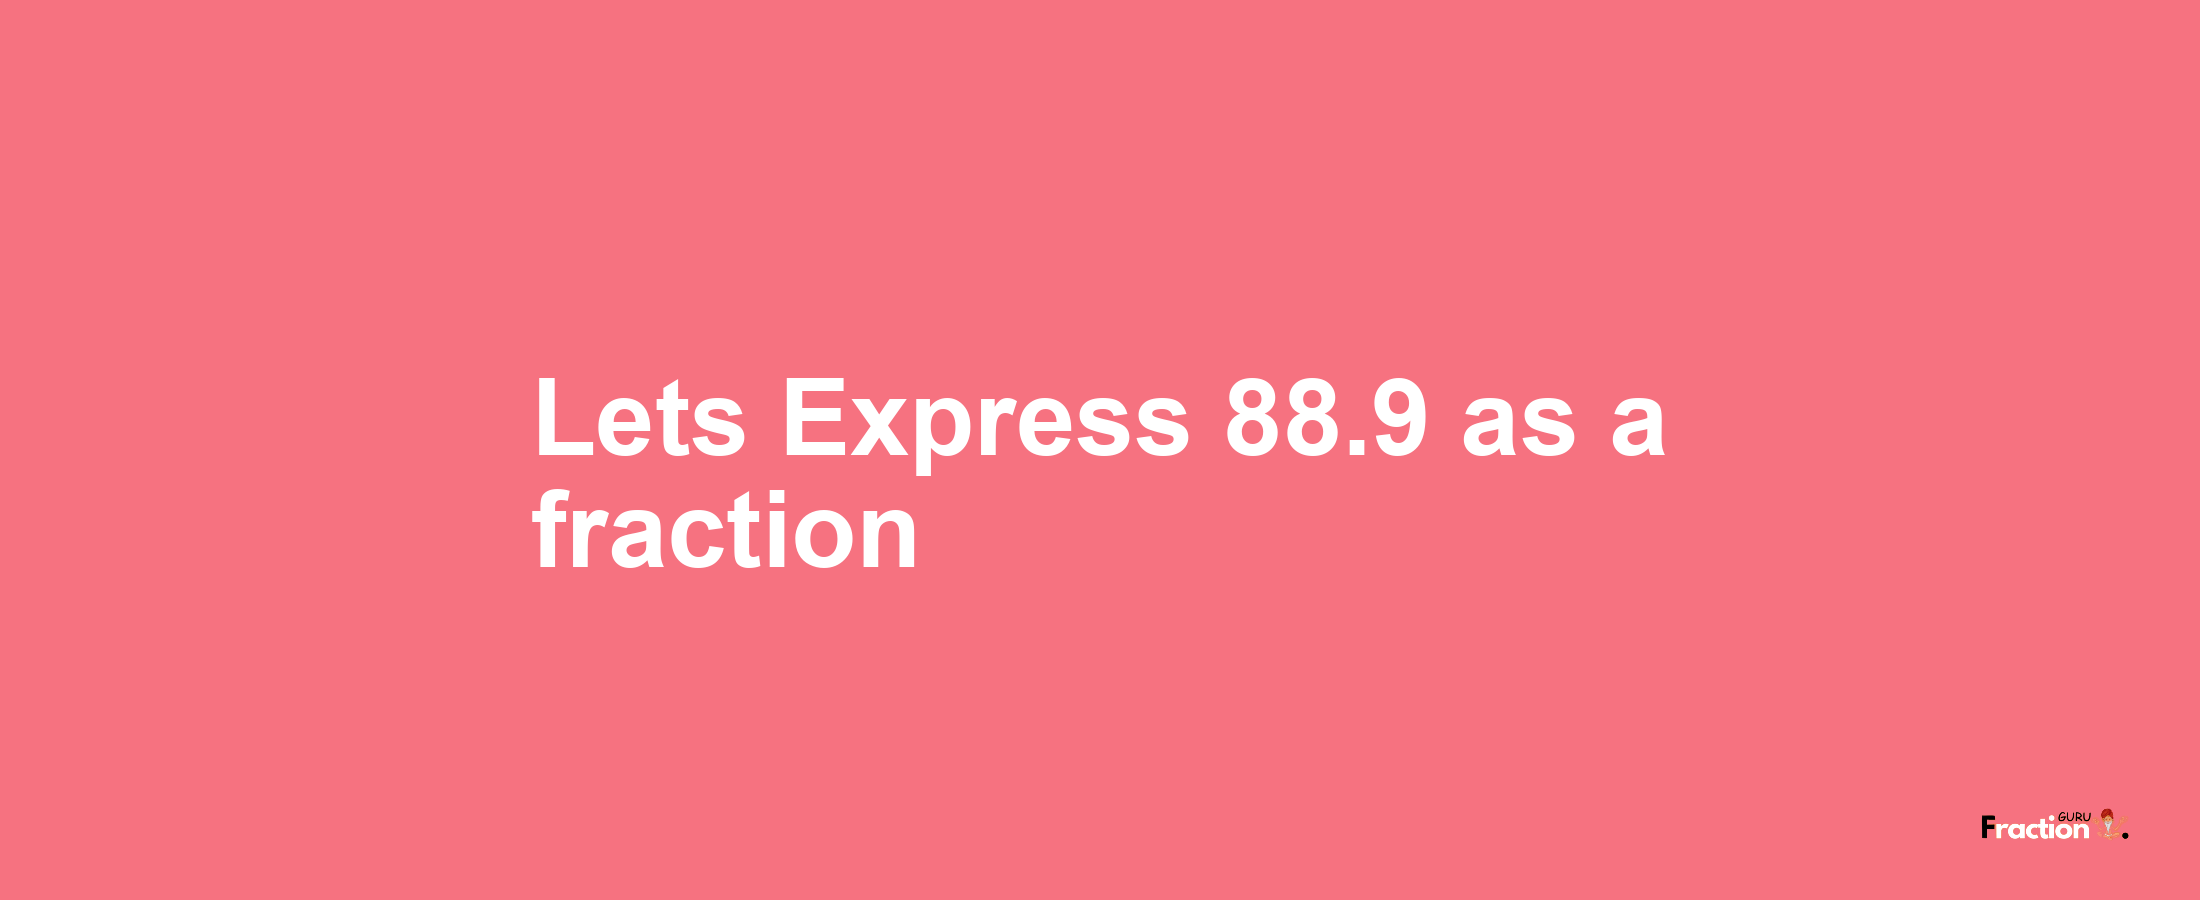 Lets Express 88.9 as afraction